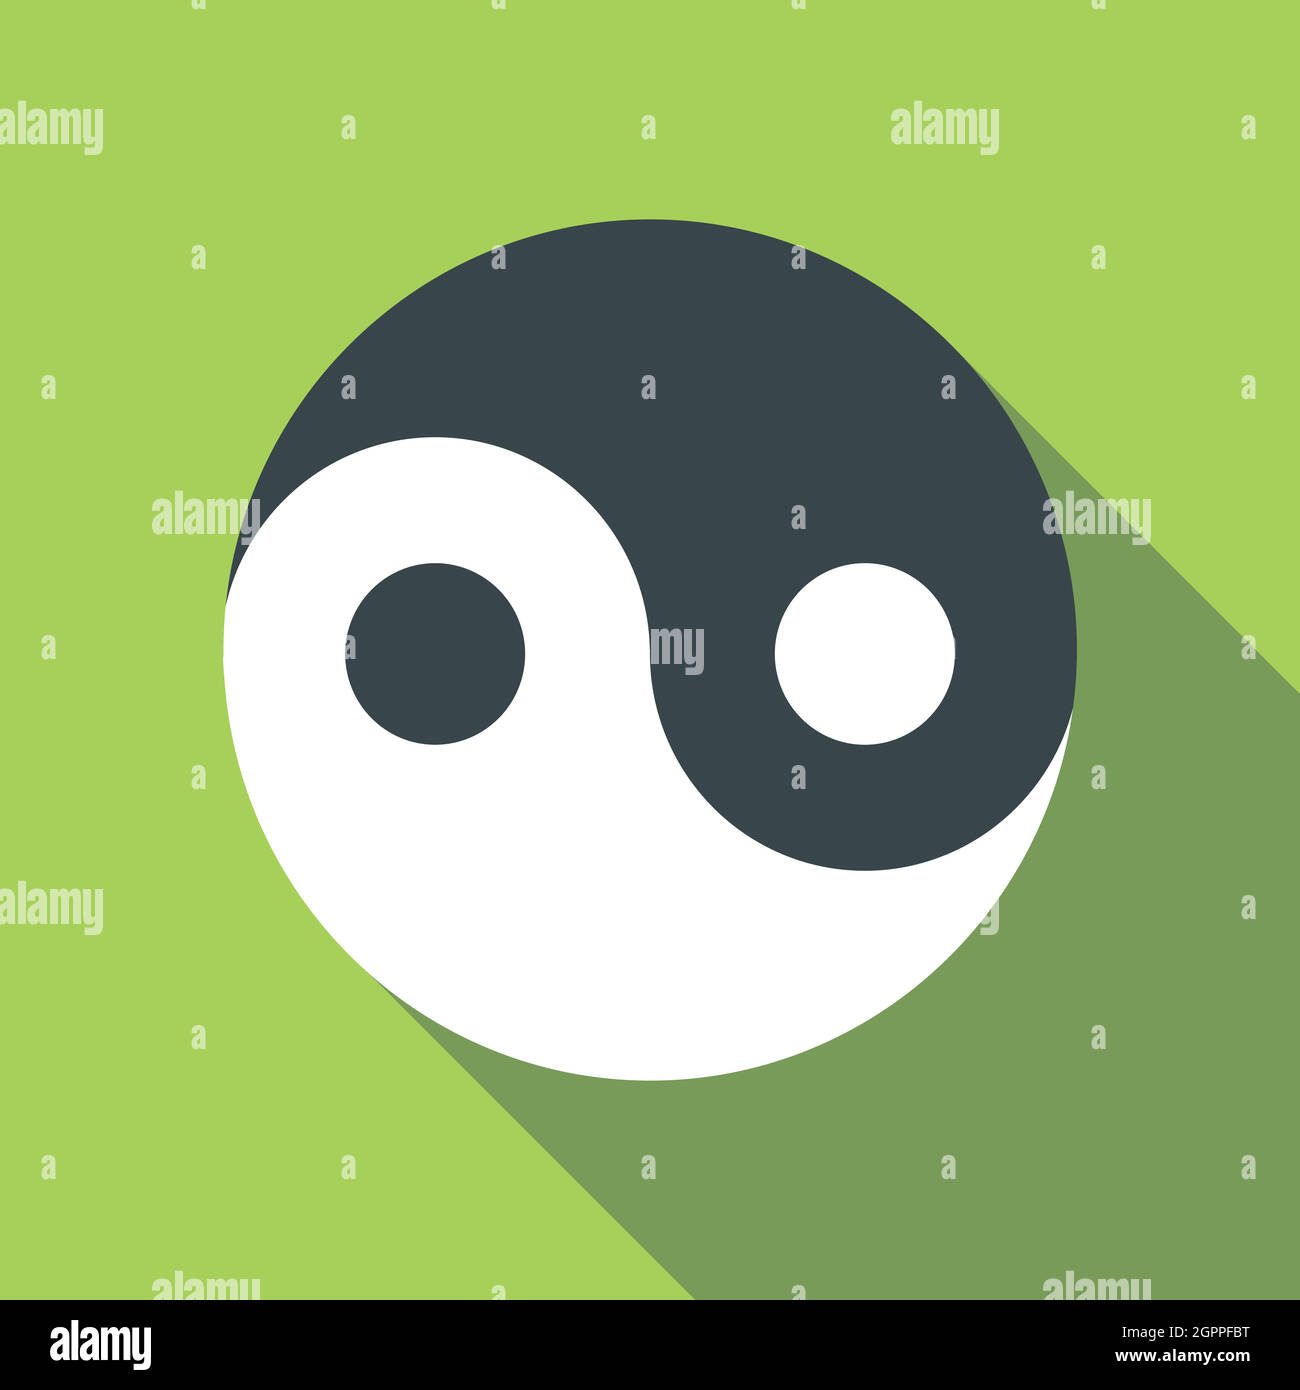 Ying yang icon, flat style Stock Vector